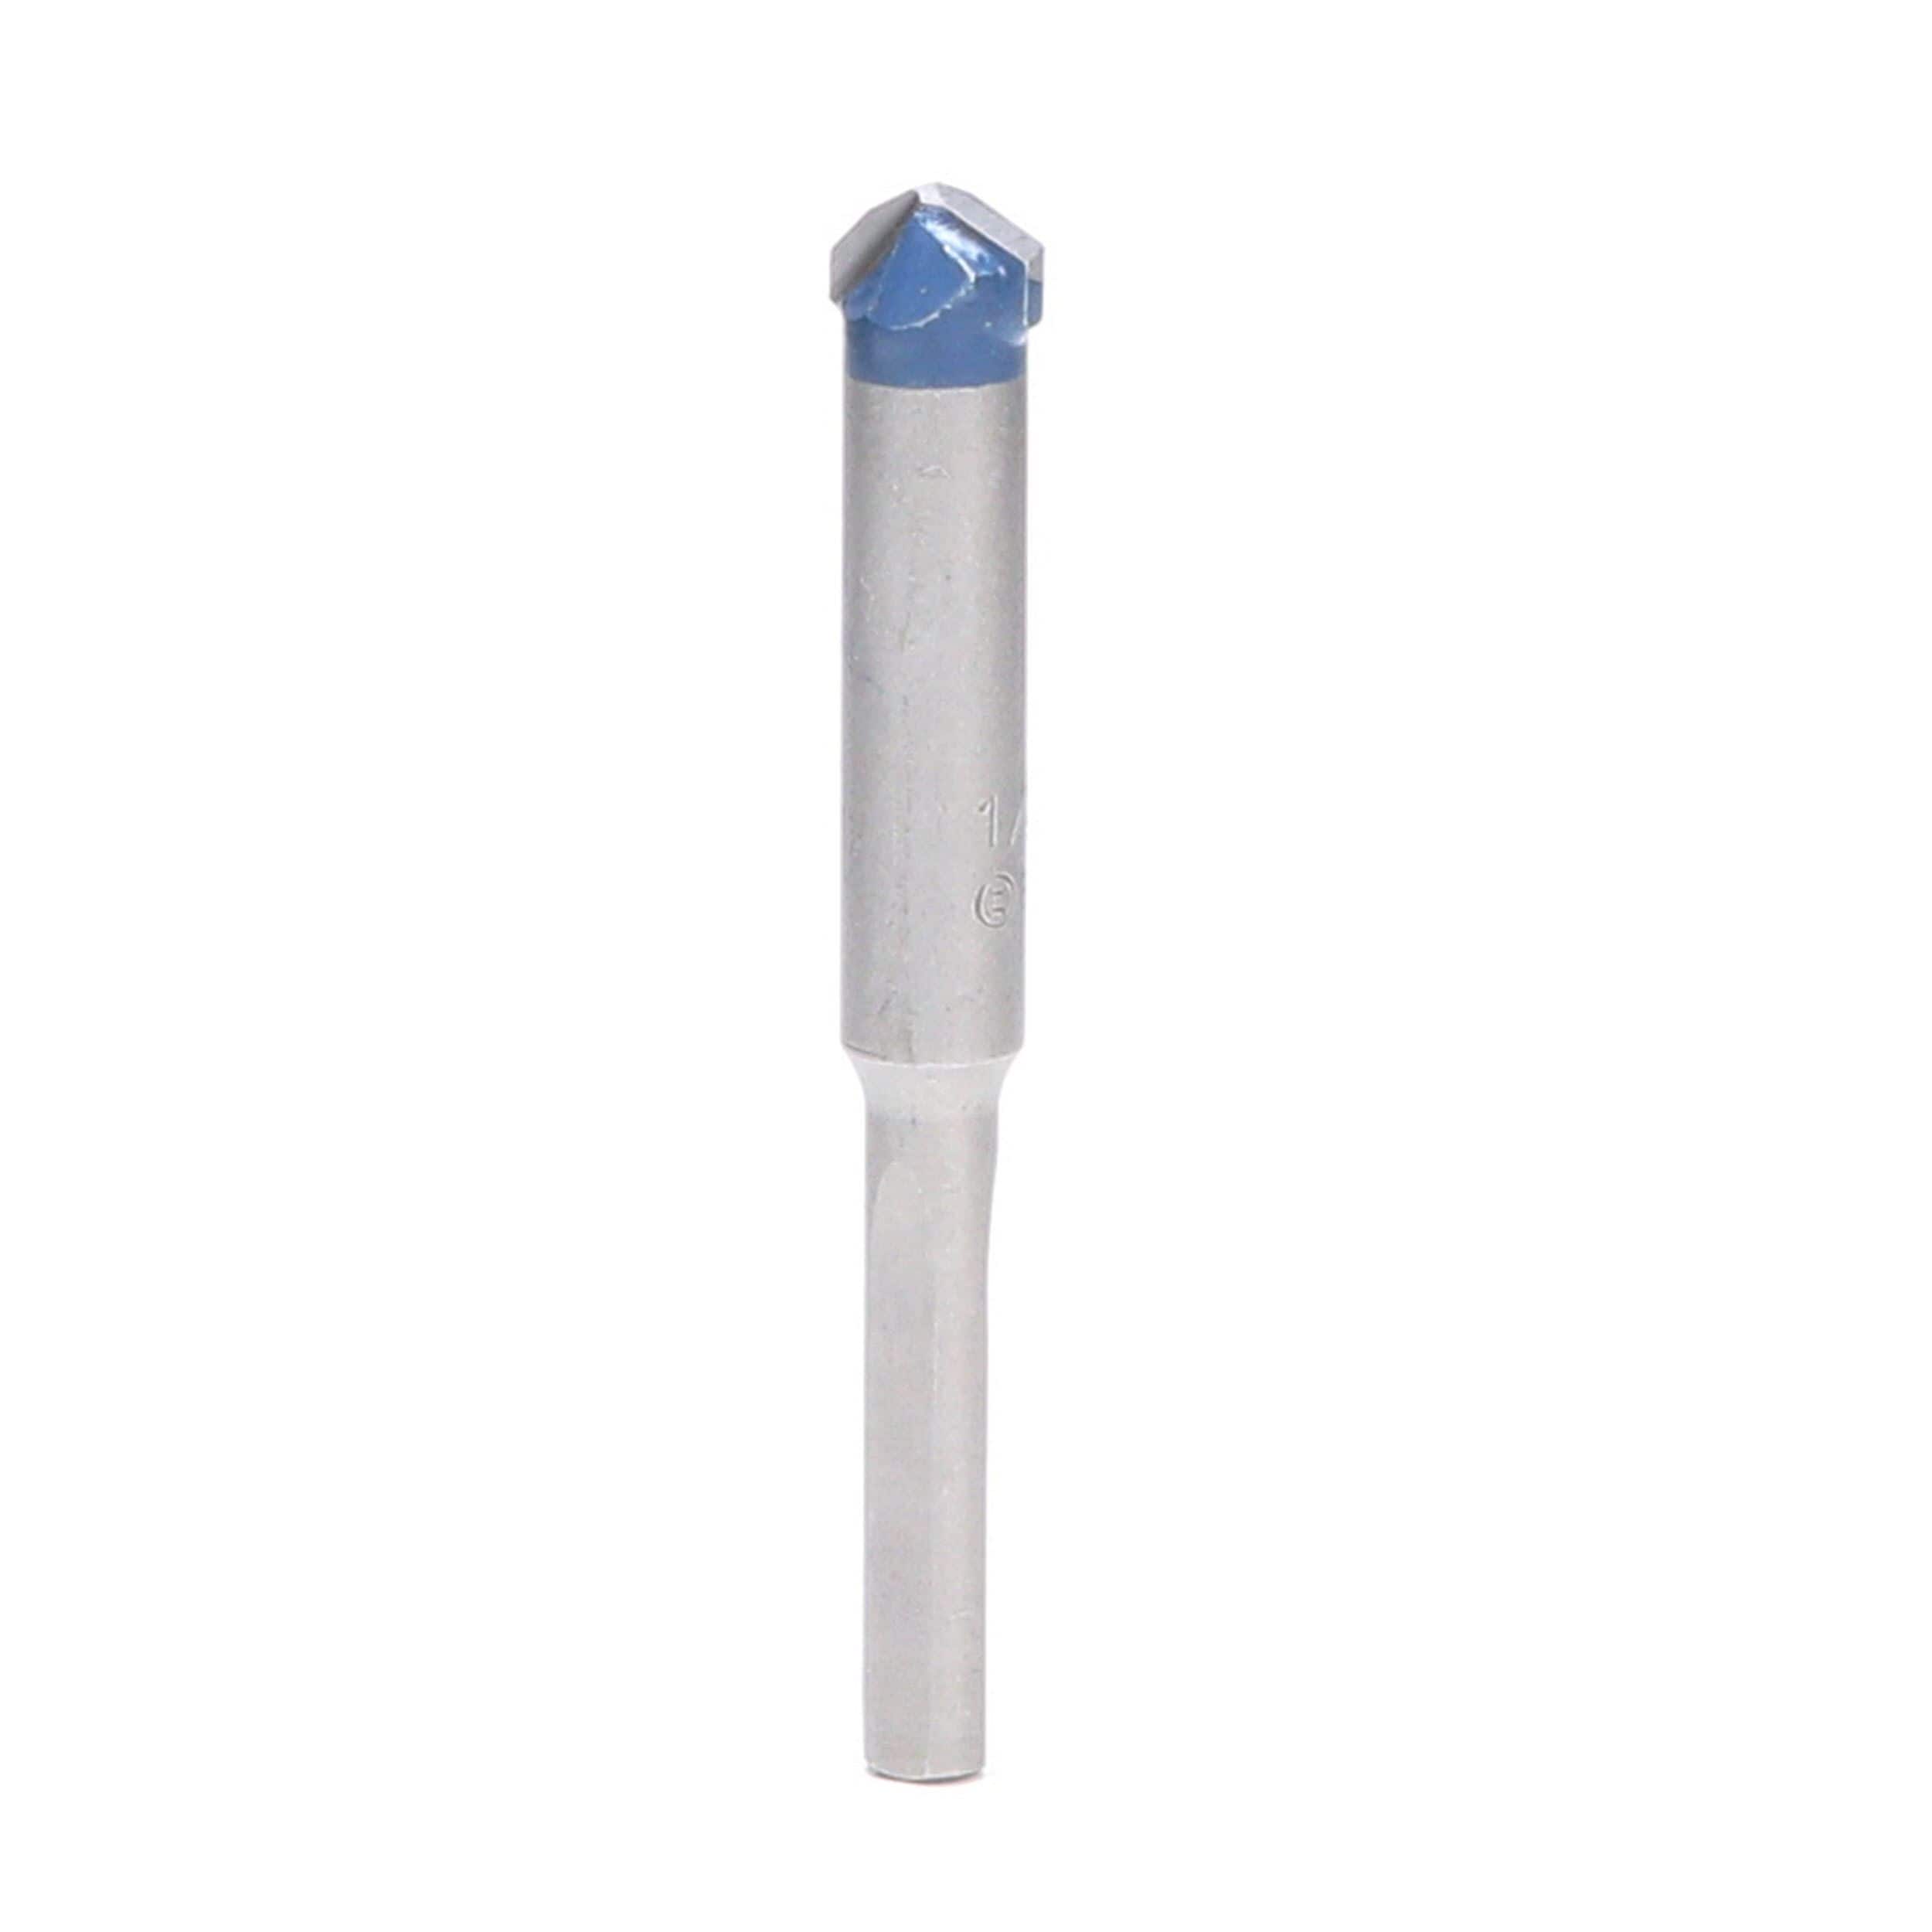 Bosch Tile and Natural Stone Drill Bit 1/2 NS600 Fast for sale online 